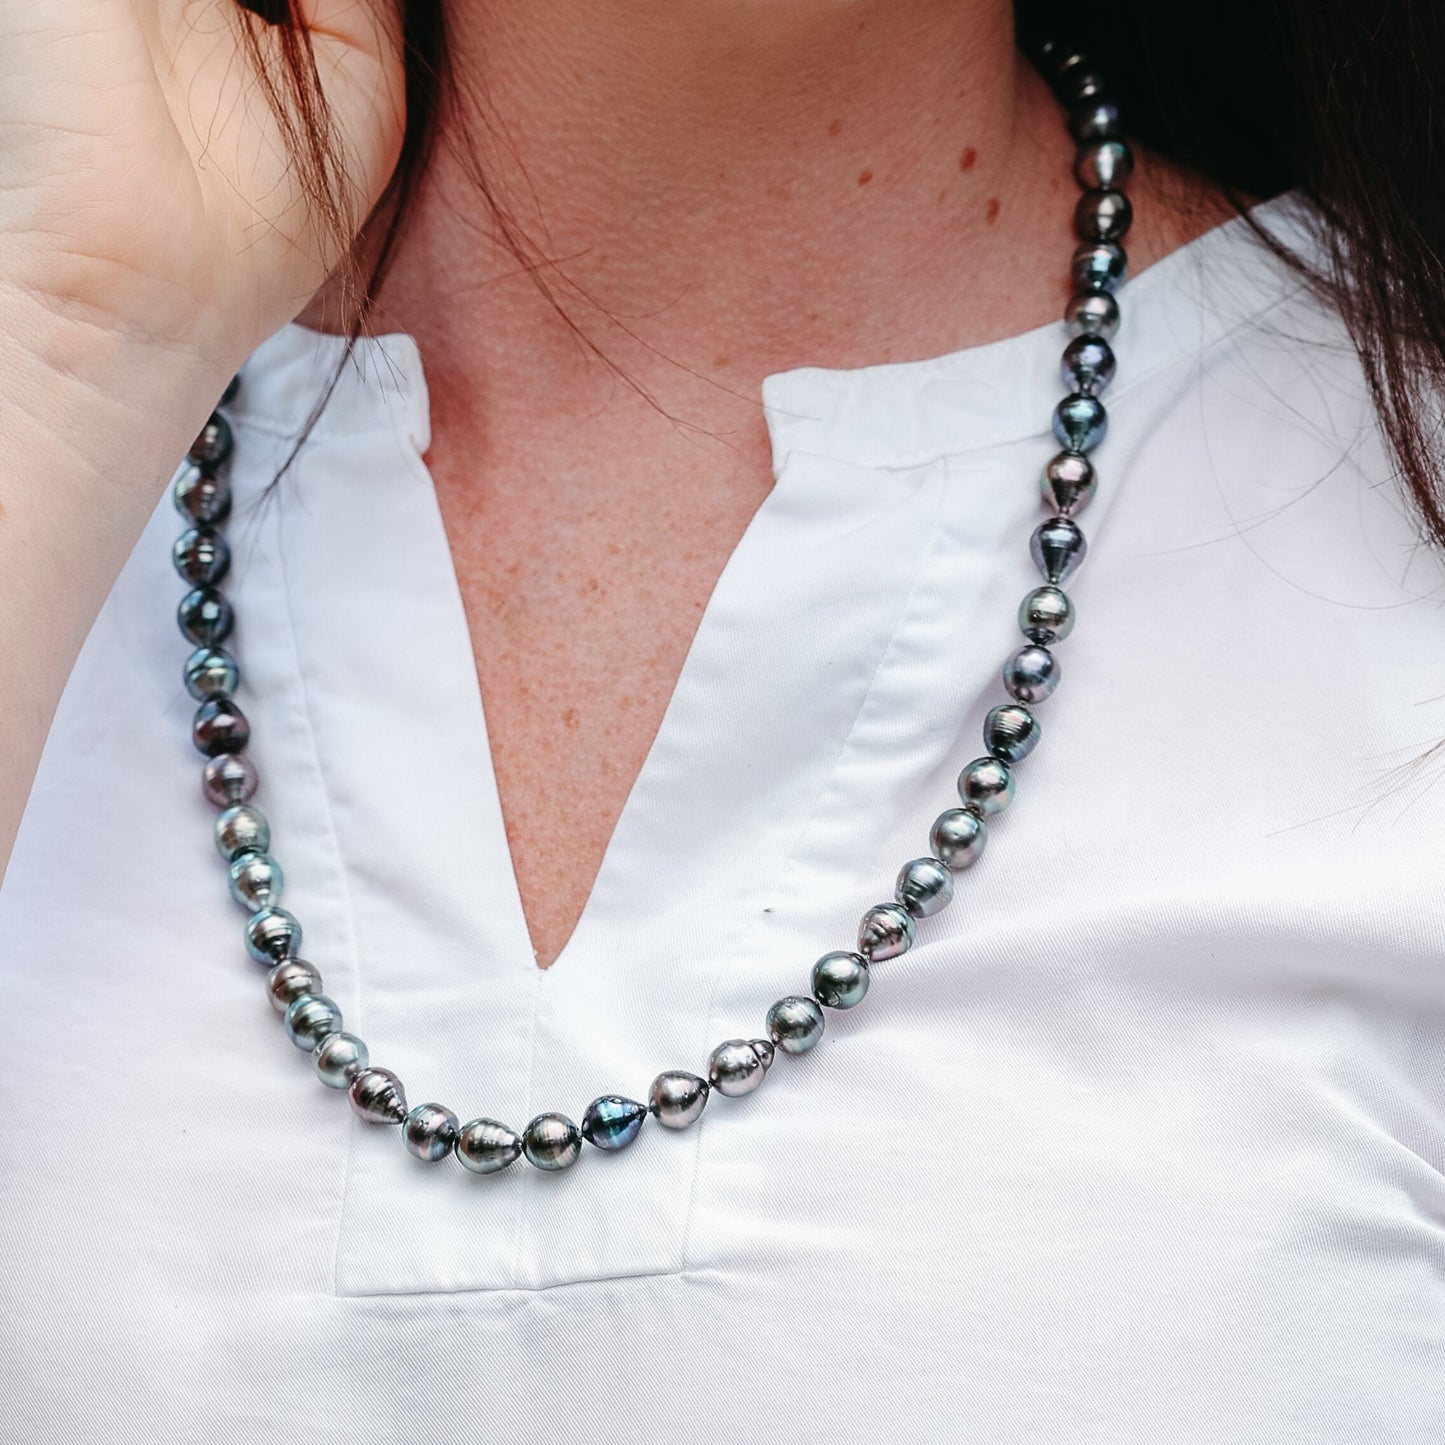 Baroque Tahitian Pearl Necklace with an 18k Rose Gold Modullyn Keys